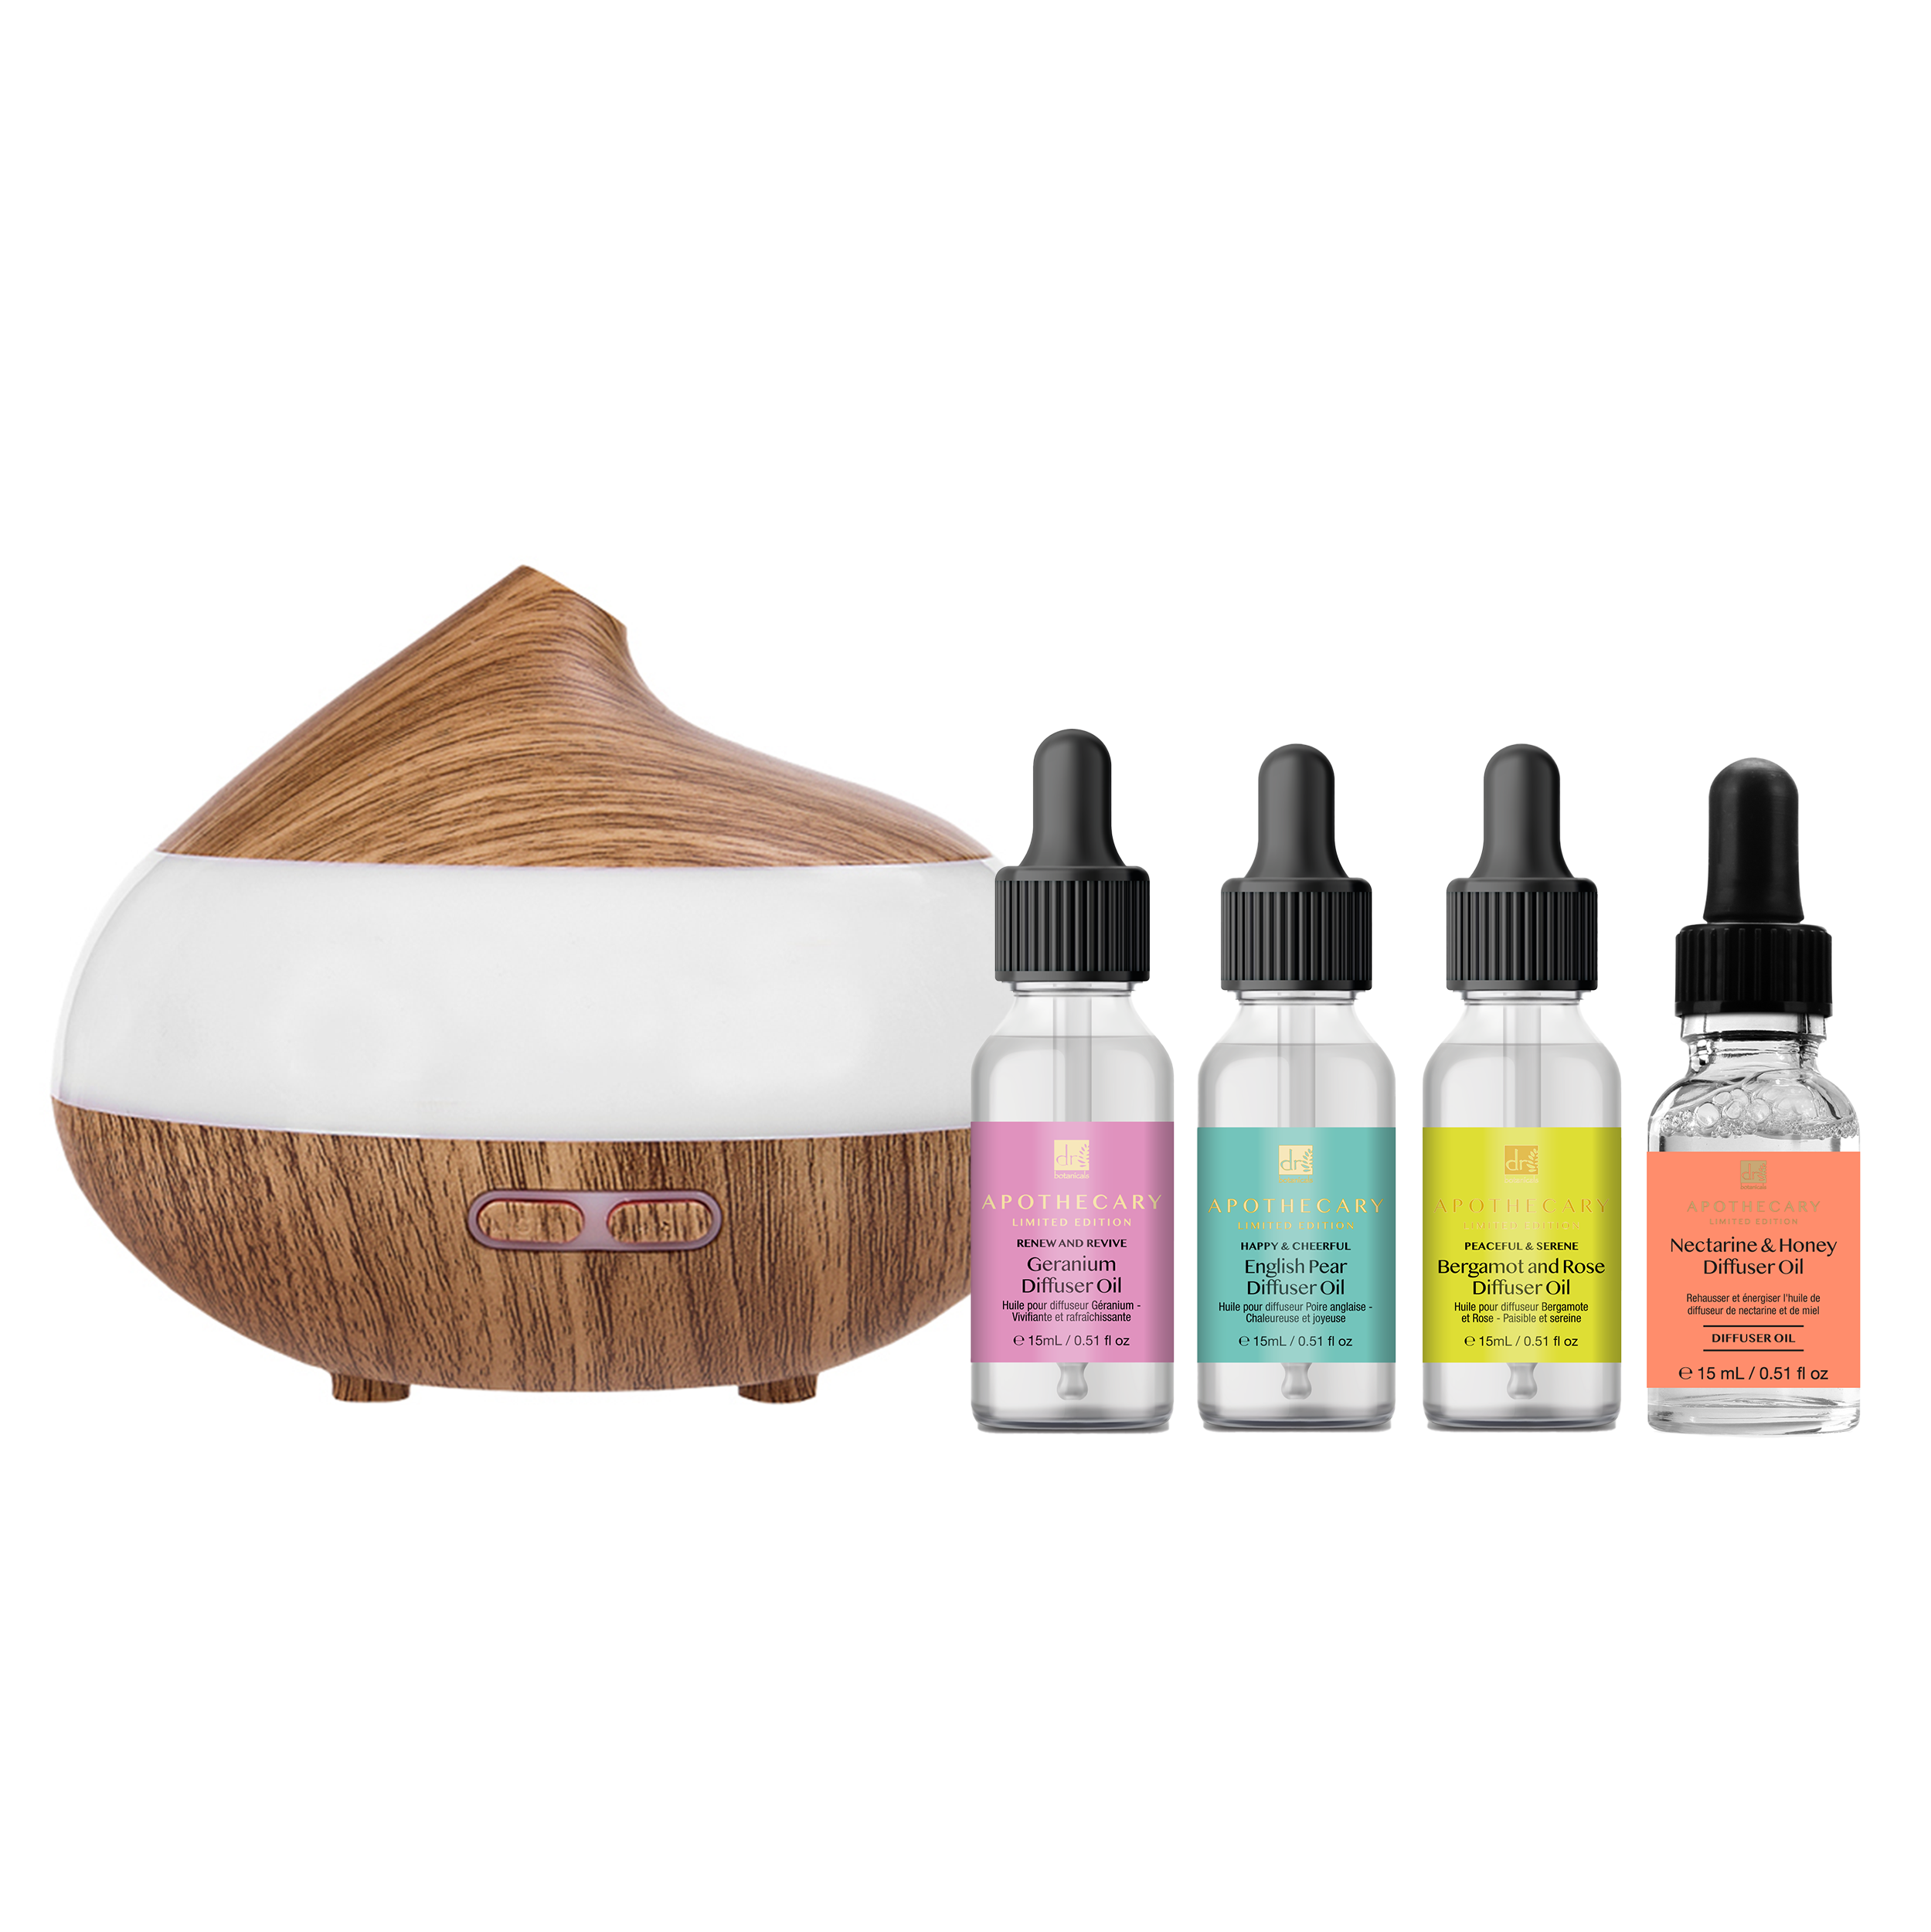 Wooden Aroma Diffuser + Oils Kit 4 pack